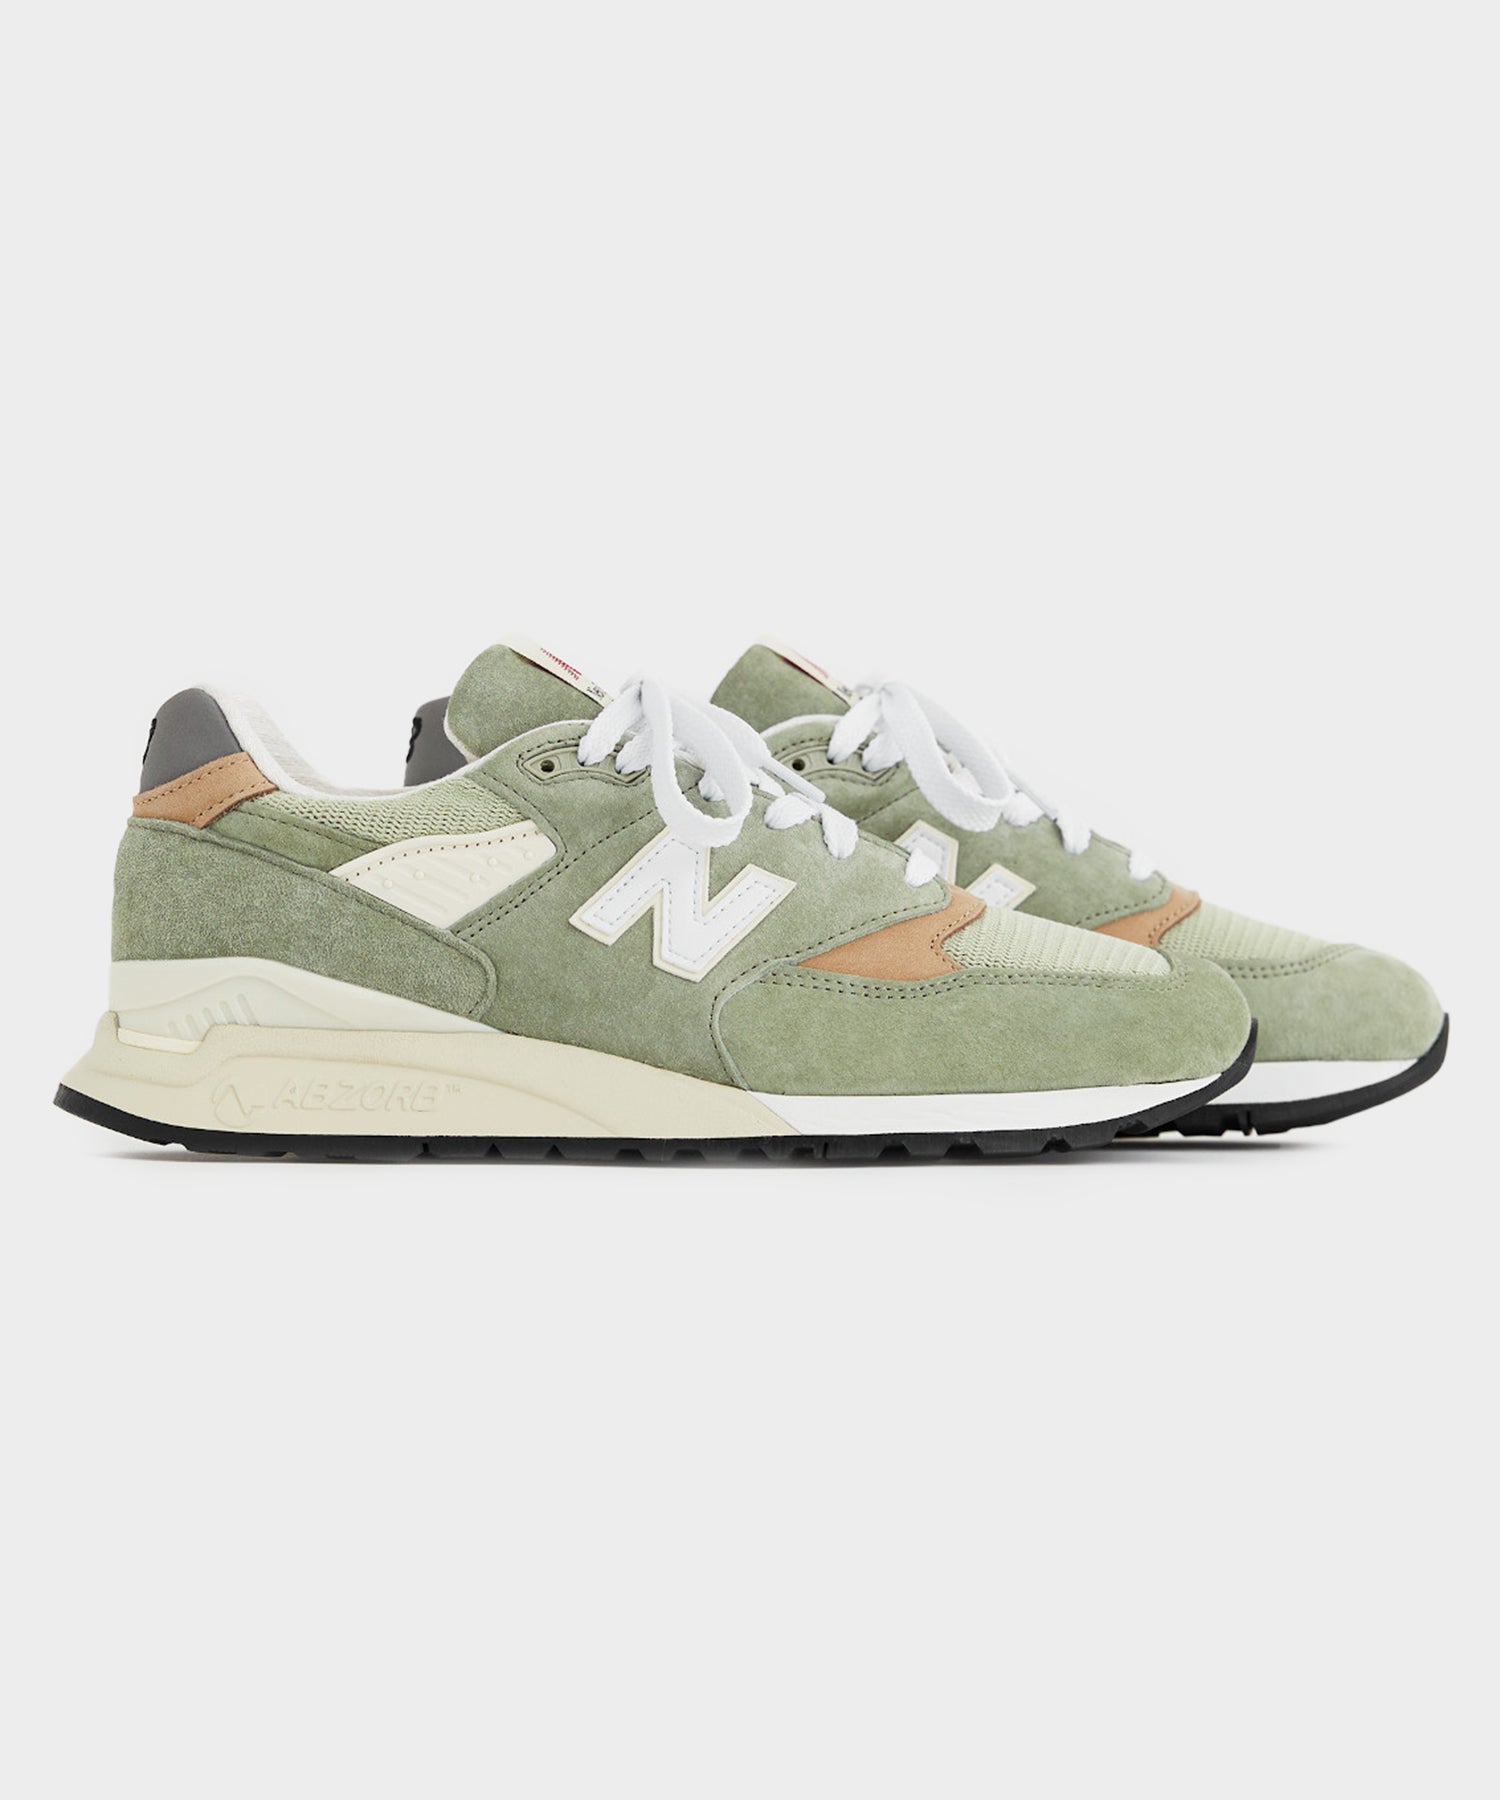 NEW BALANCE 998 Made in USA Olive Green